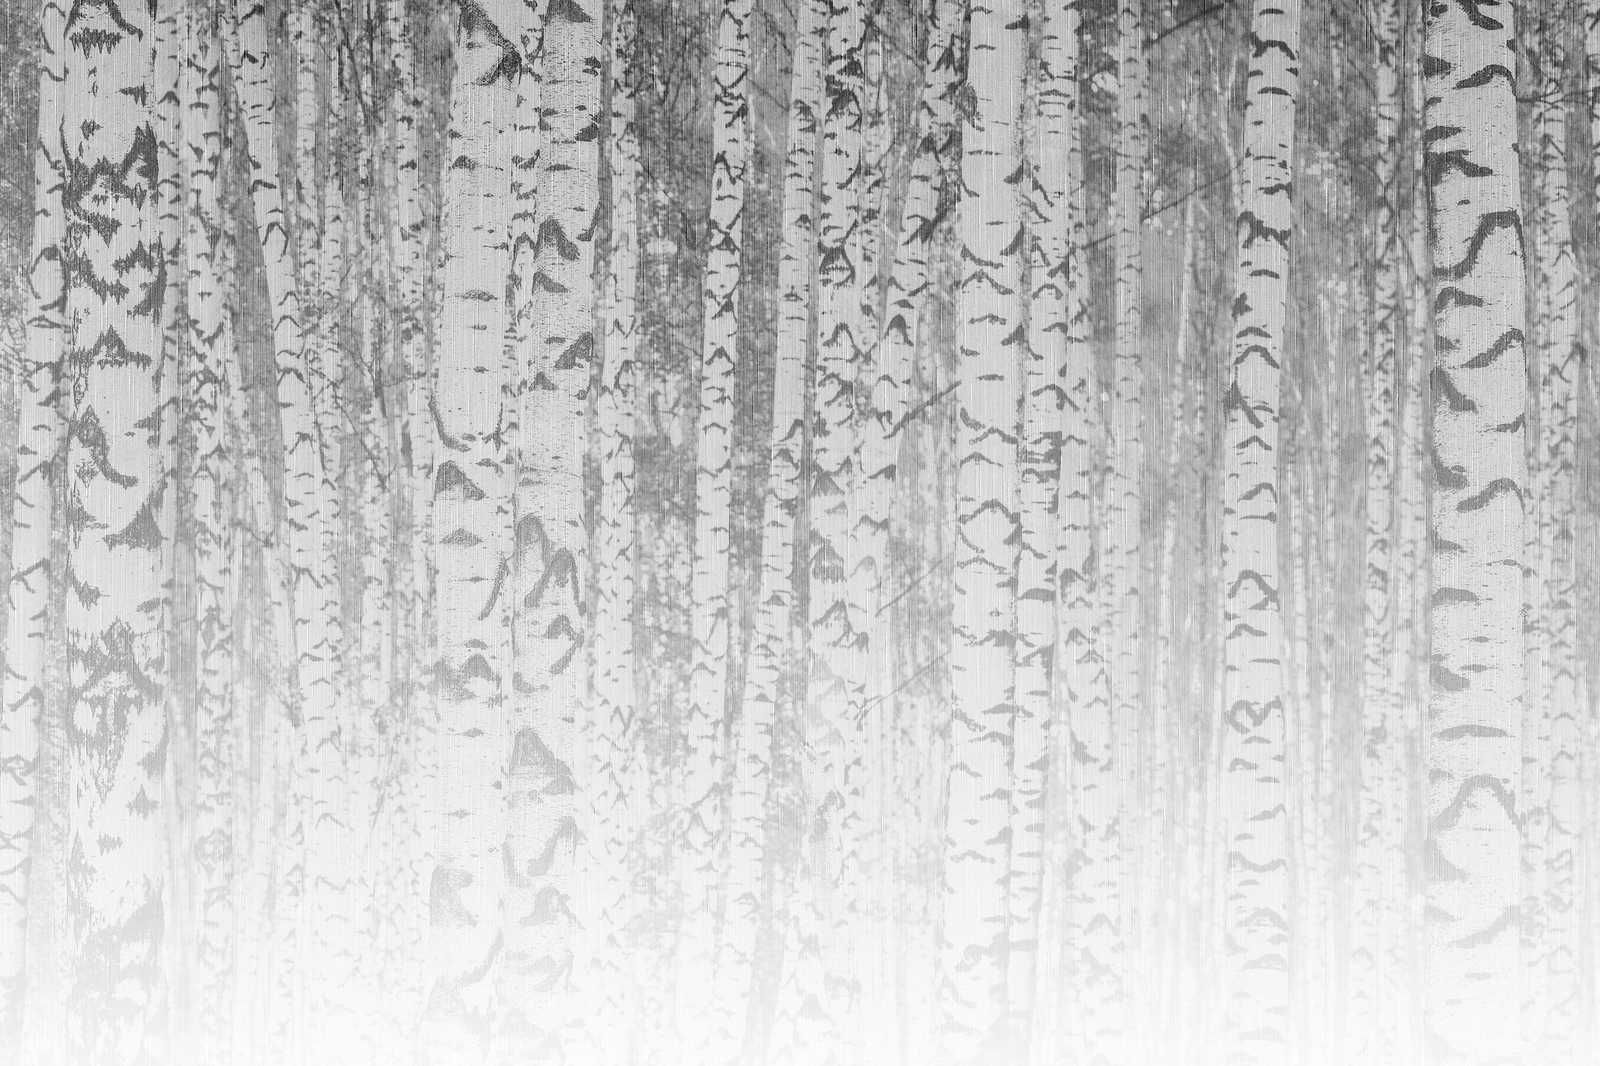             Canvas painting light birch tree trunks in misty forest - 0,90 m x 0,60 m
        